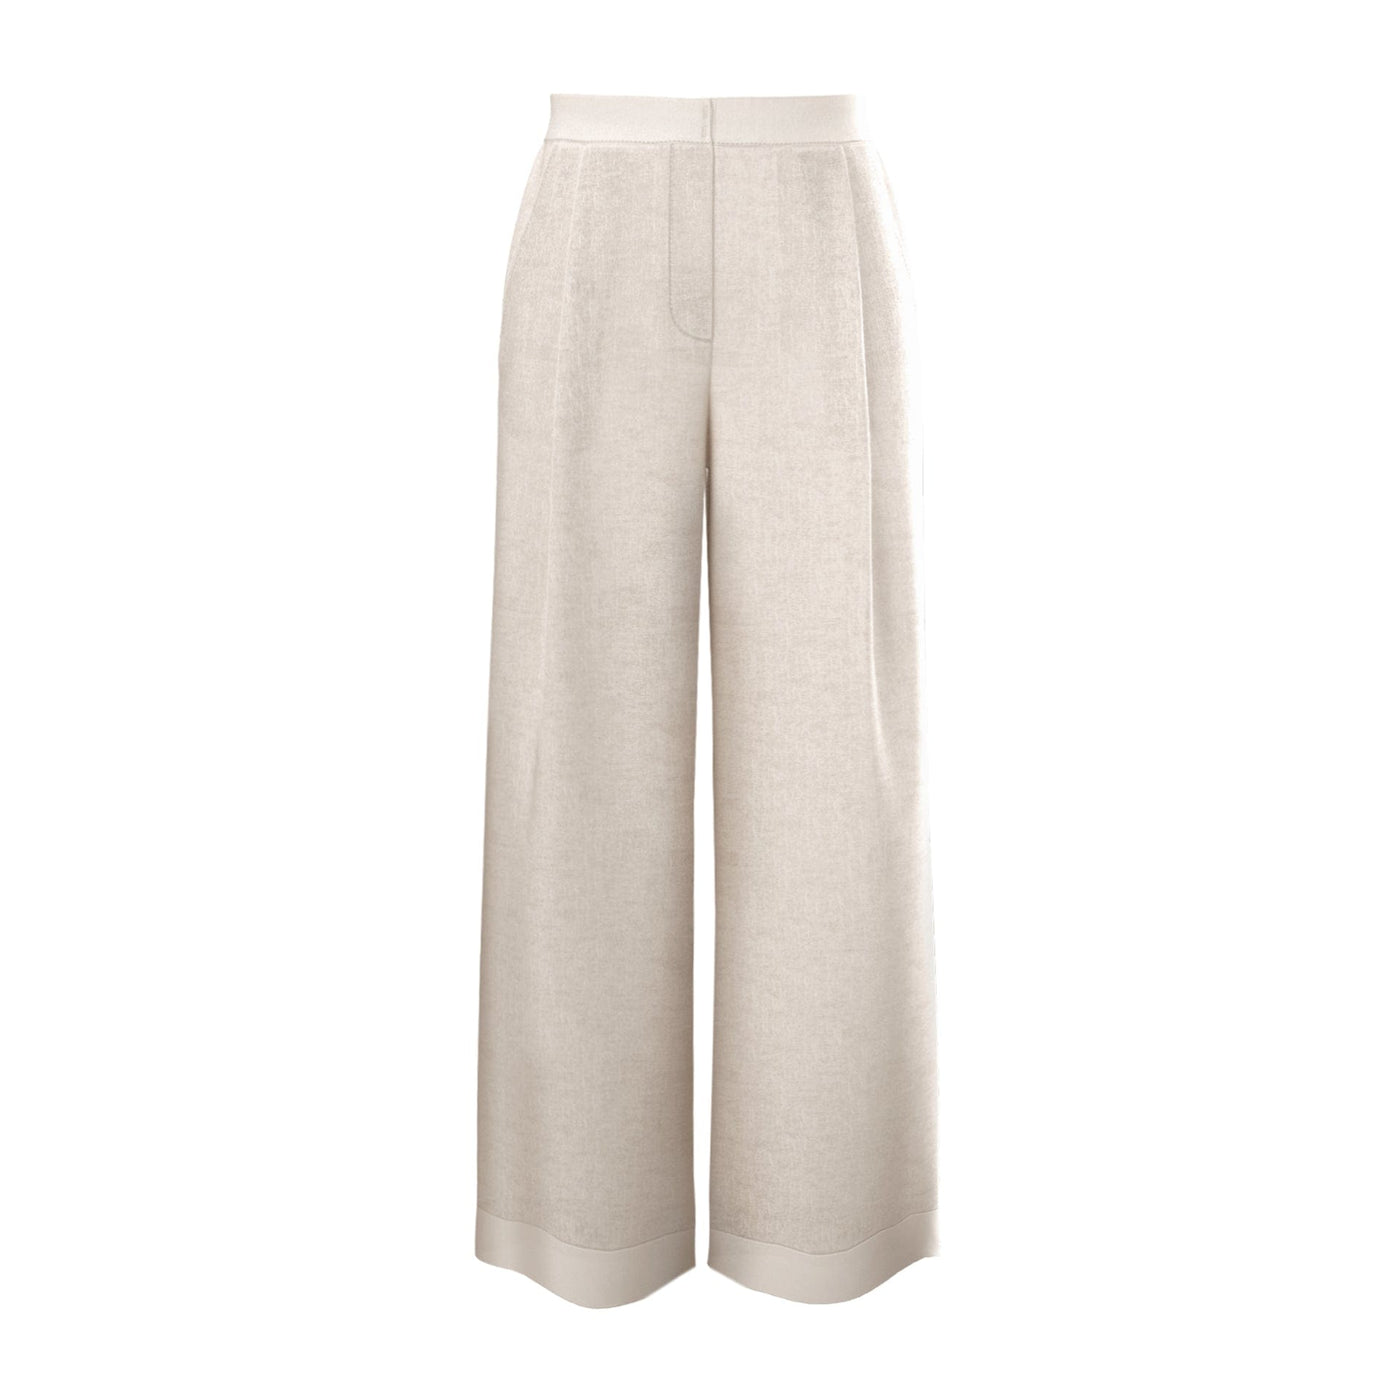 Lilly Pilly Collection Oli pants made from 100% Organic linen in Oatmeal. as 3D model showing front view